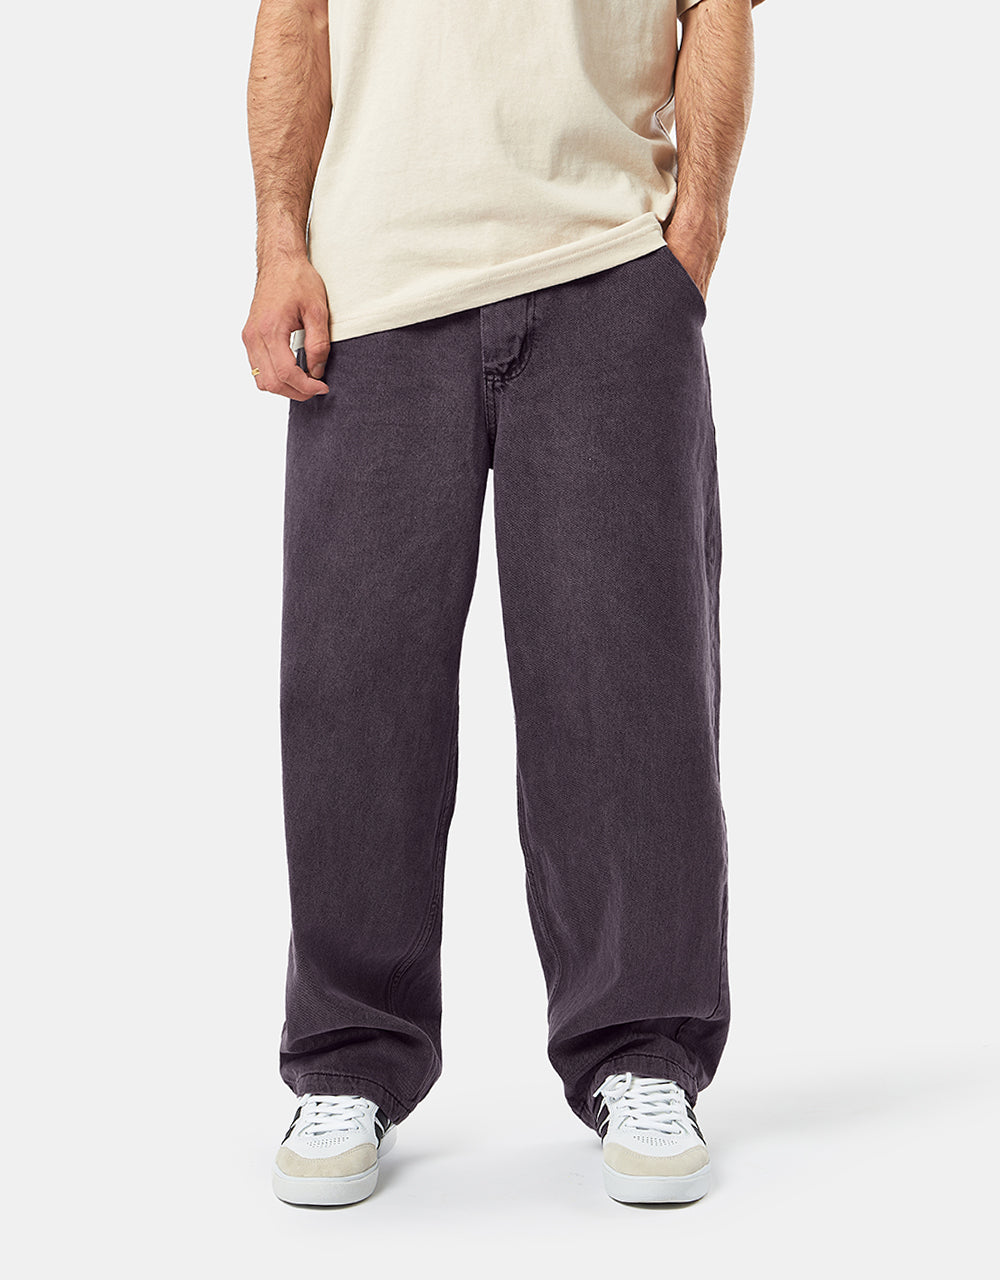 Route One Super Baggy Denim Jeans - Moderate Purple